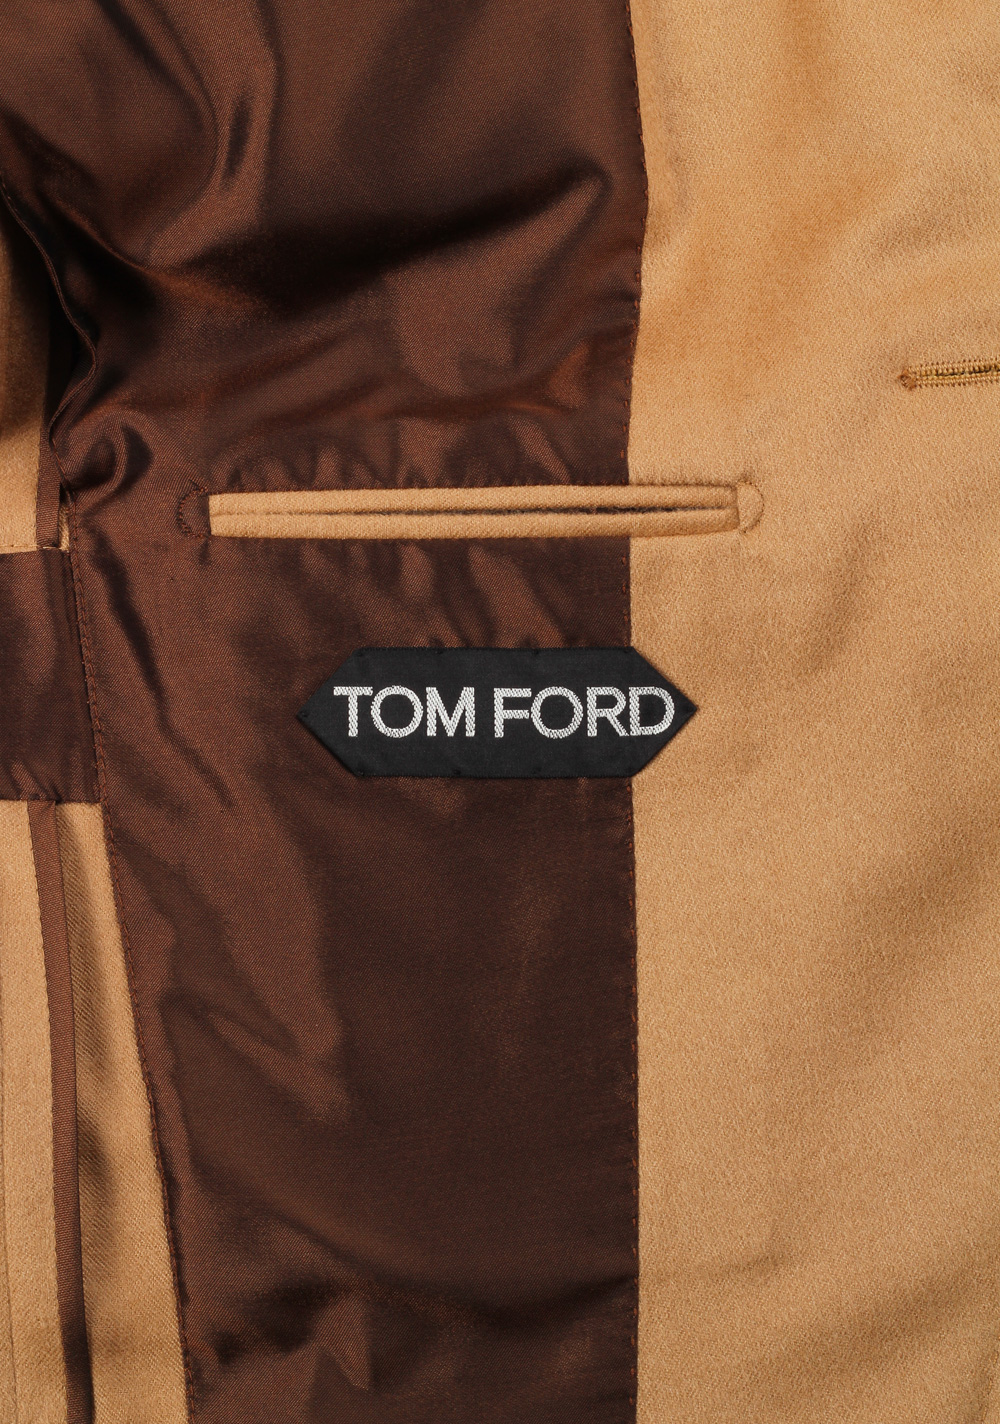 TOM FORD O’Connor Camel Sport Coat Size 48 / 38R U.S. Fit Y in 100% ...